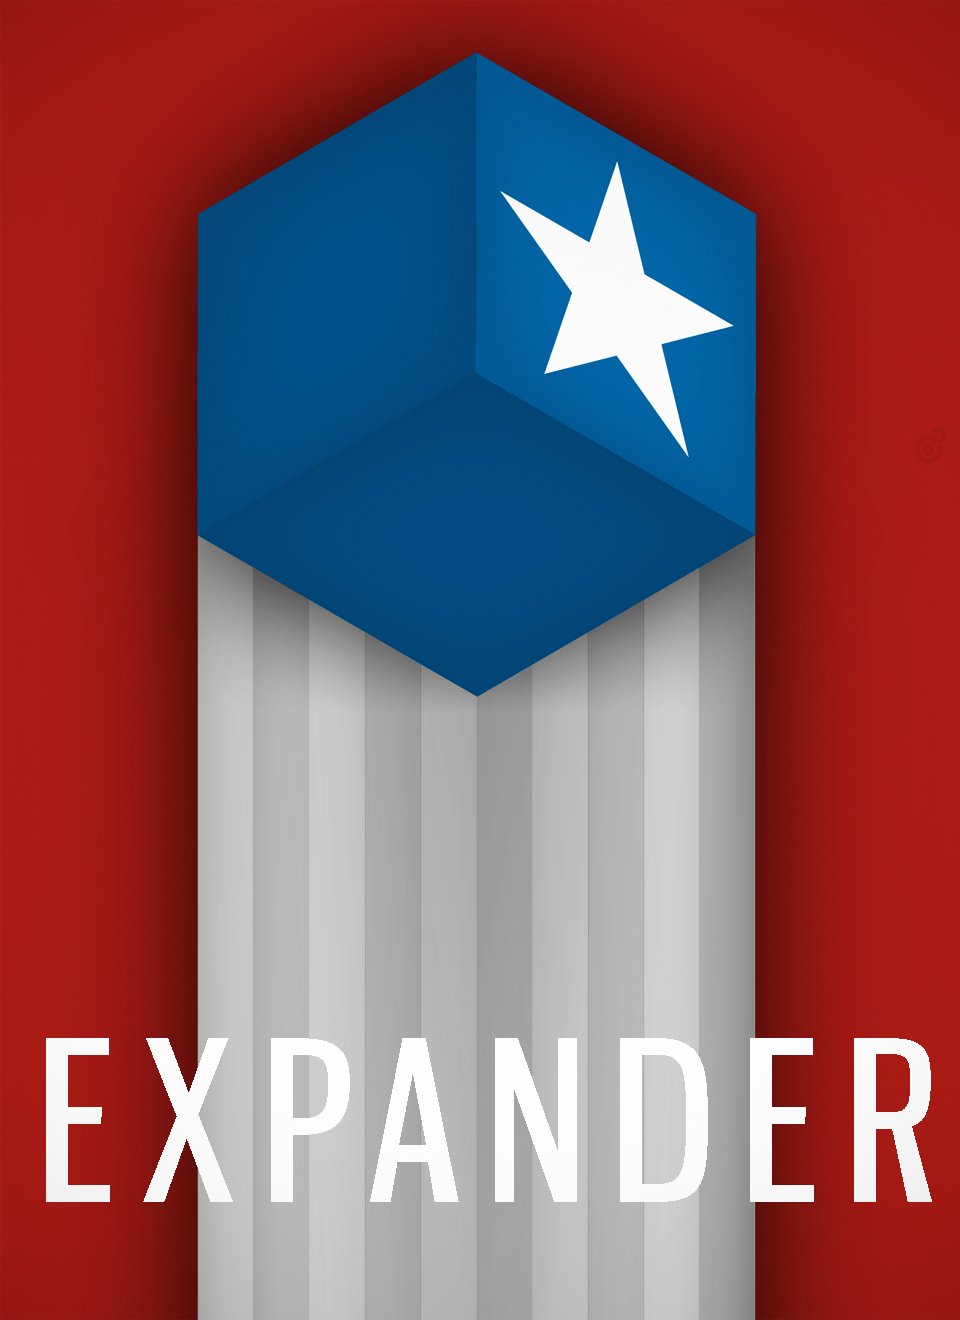 Image of Expander